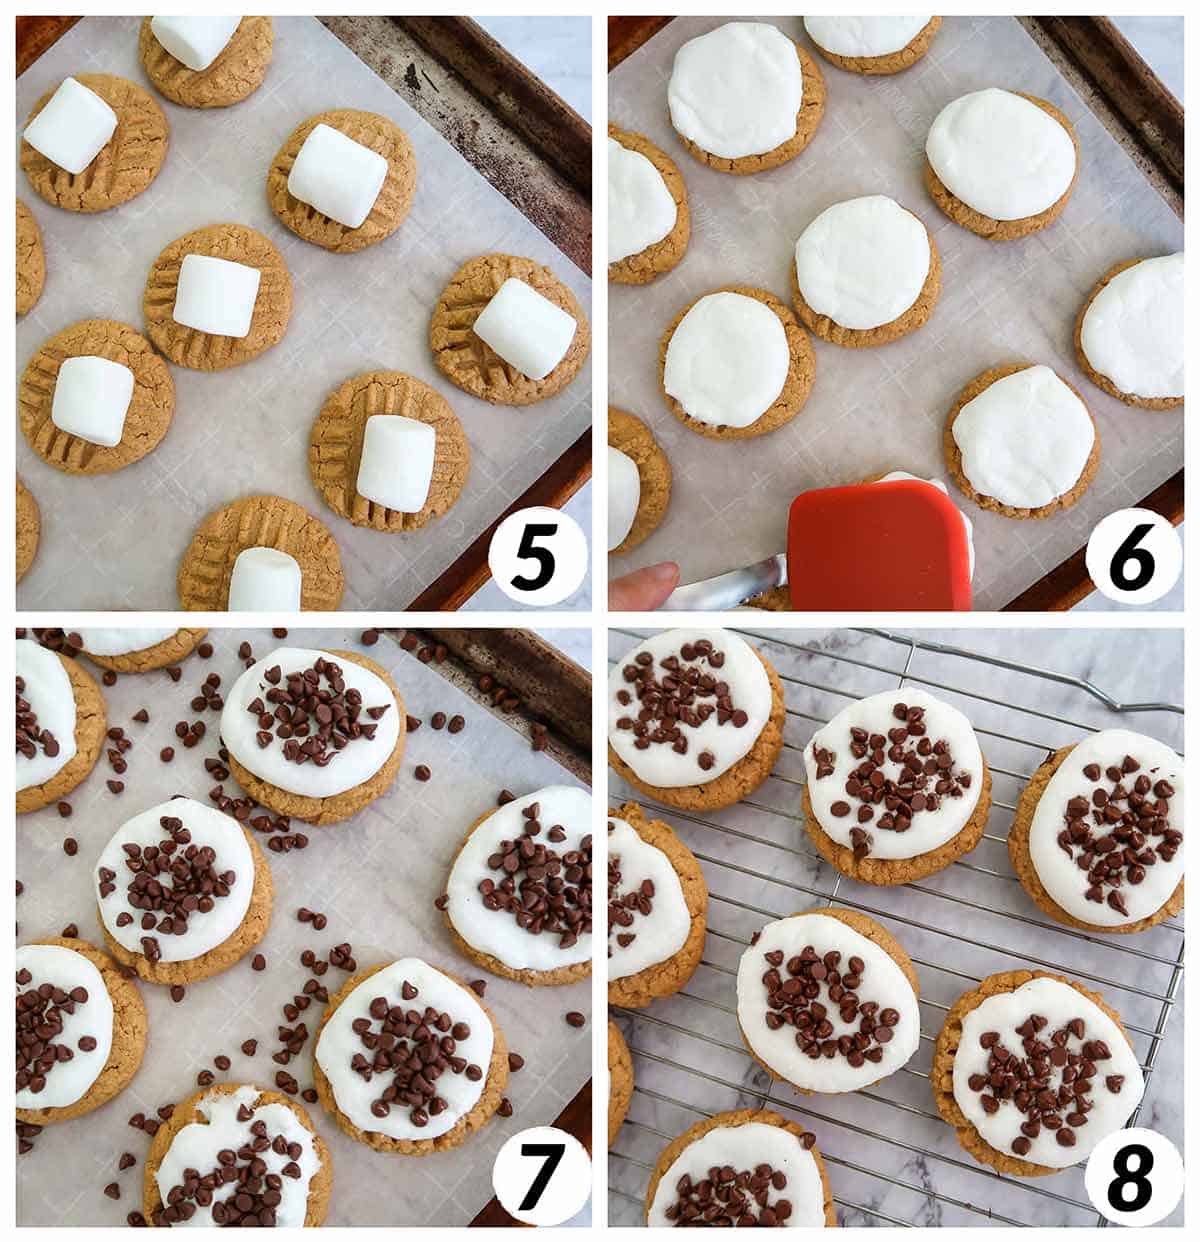 Four panel collage of process steps 5-8: melting marshmallows, adding chocolate chips, and letting the cookies cool.